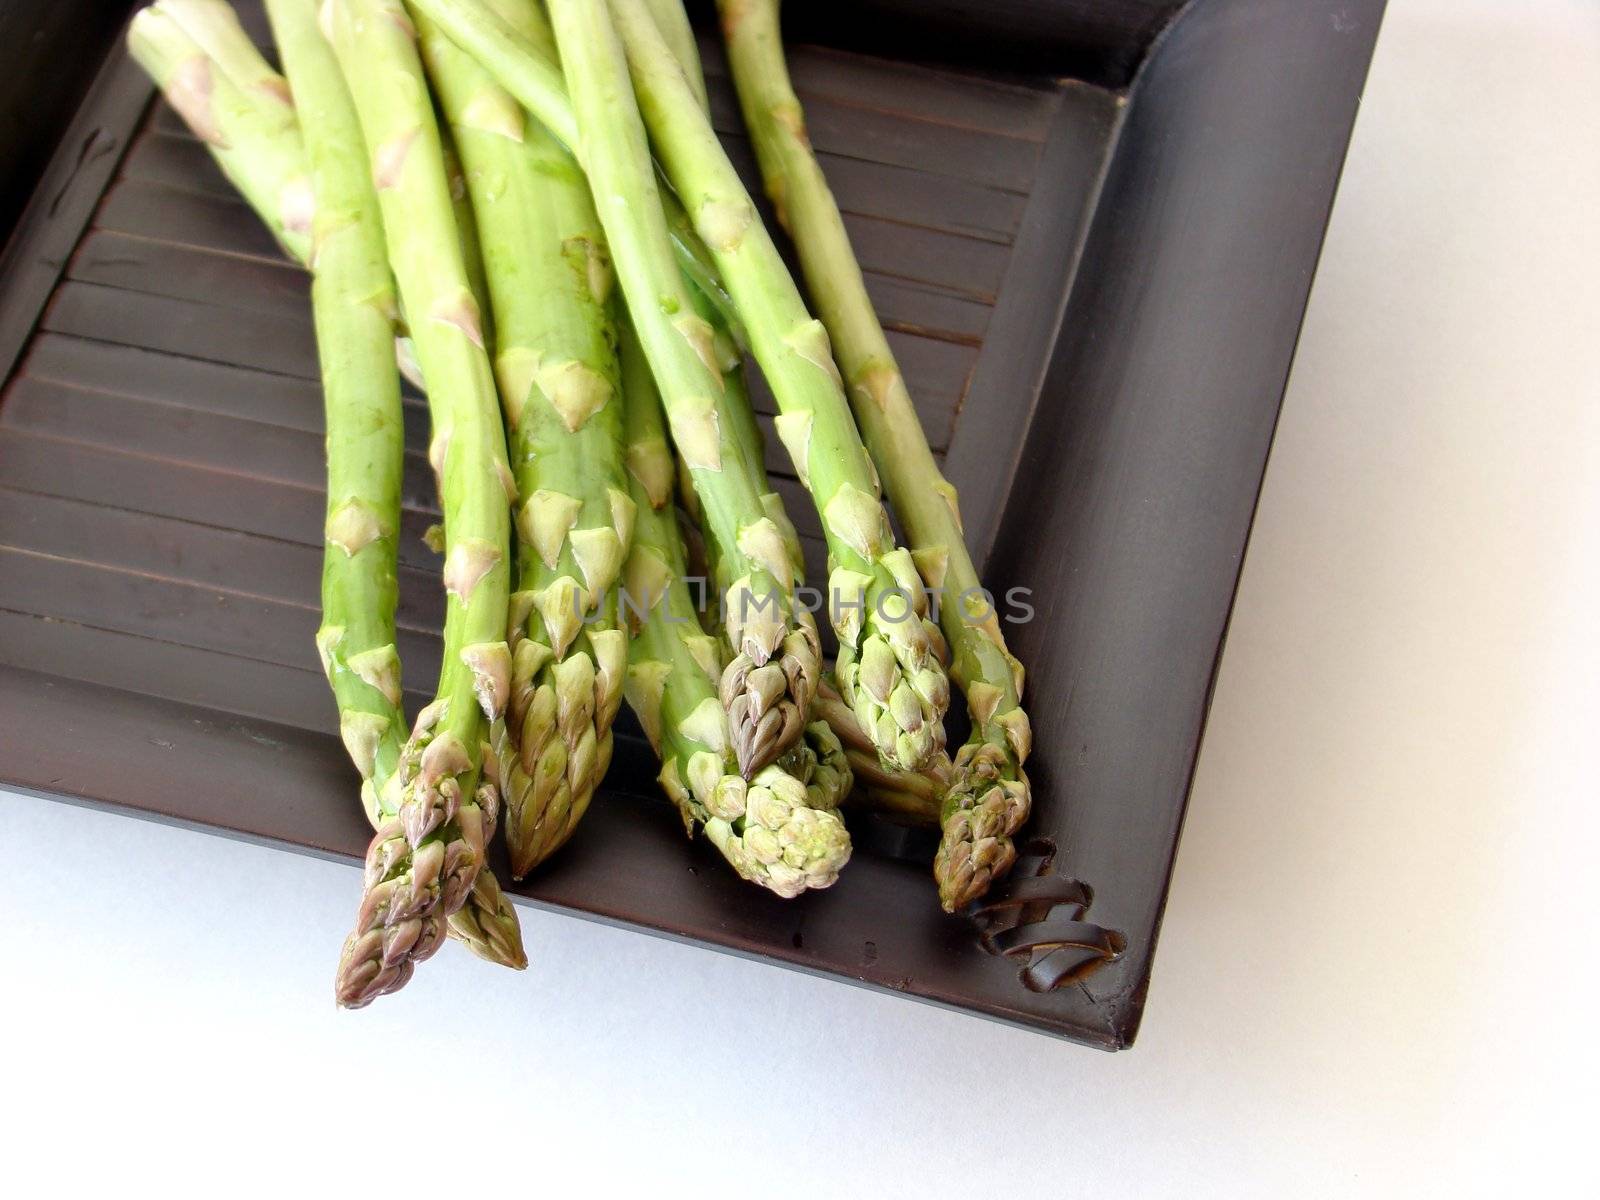 Bunch of asparagus on black plate, close-up